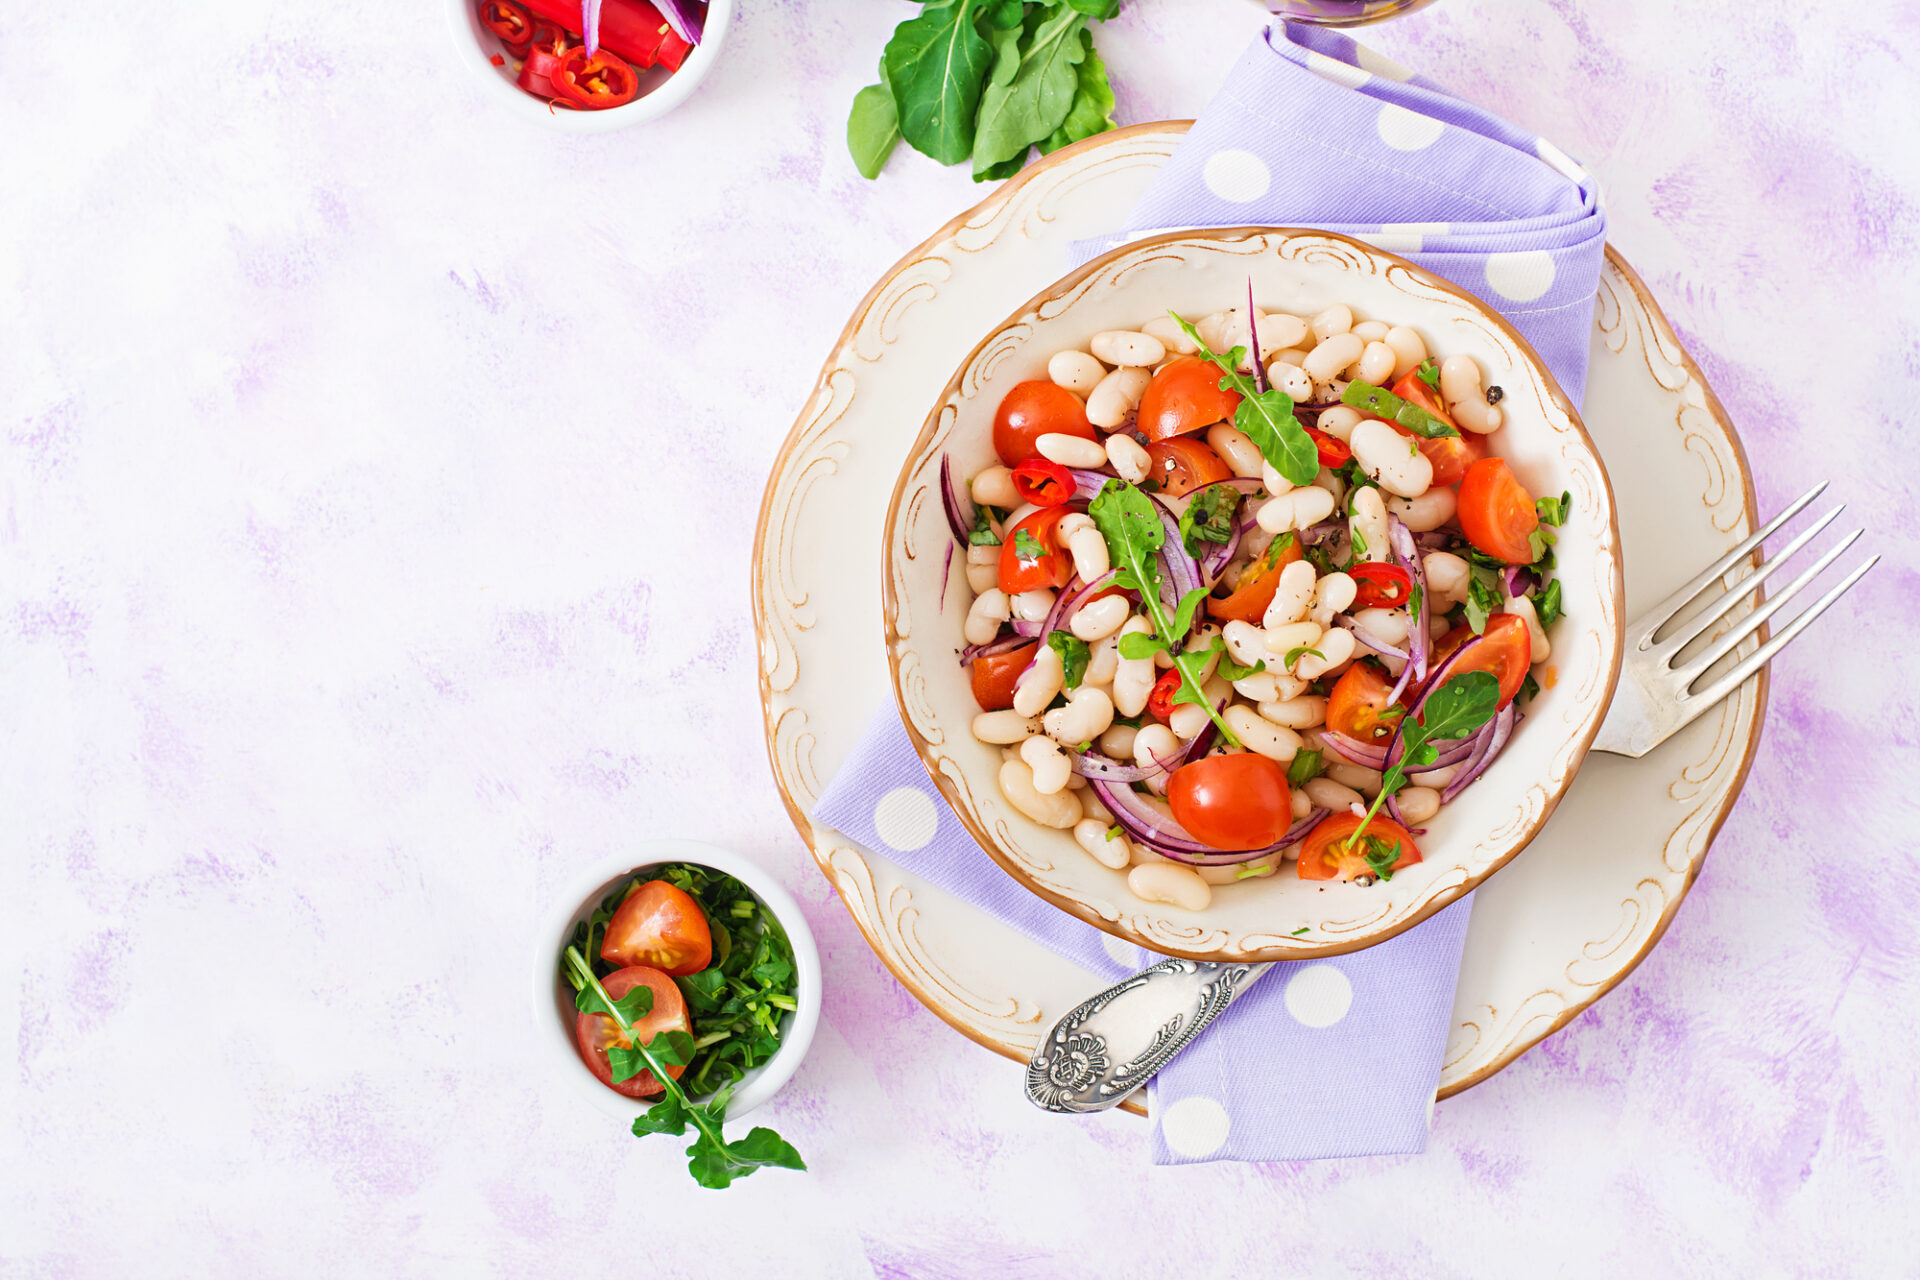 Cannellini bean salad with red onion.